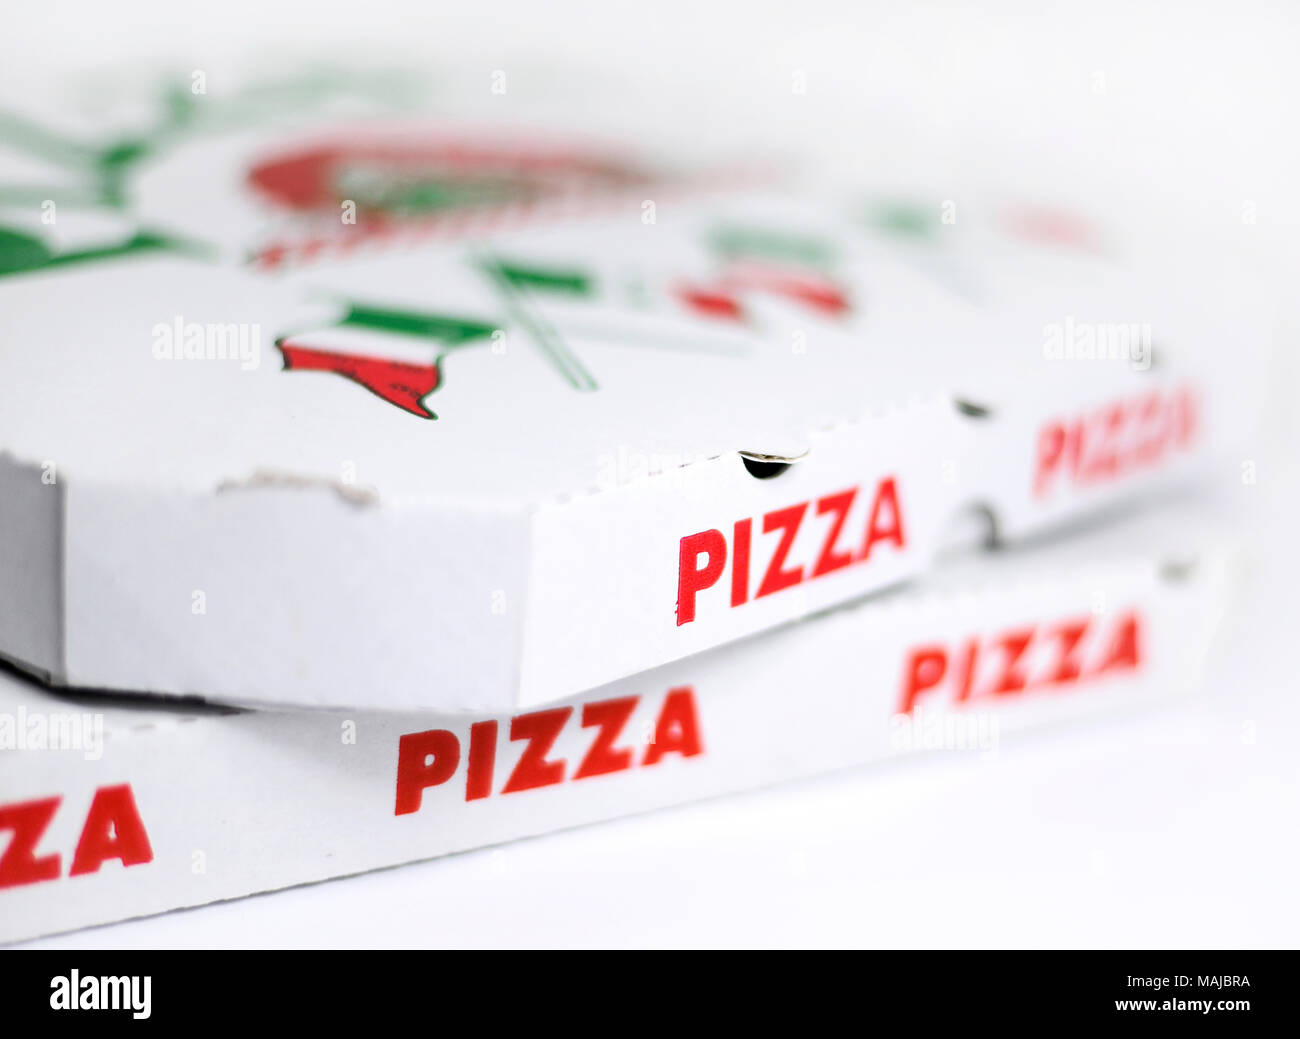 Pizza boxes or delivery boxes, isolated on white background. Pizza package, close-up shot. Stock Photo